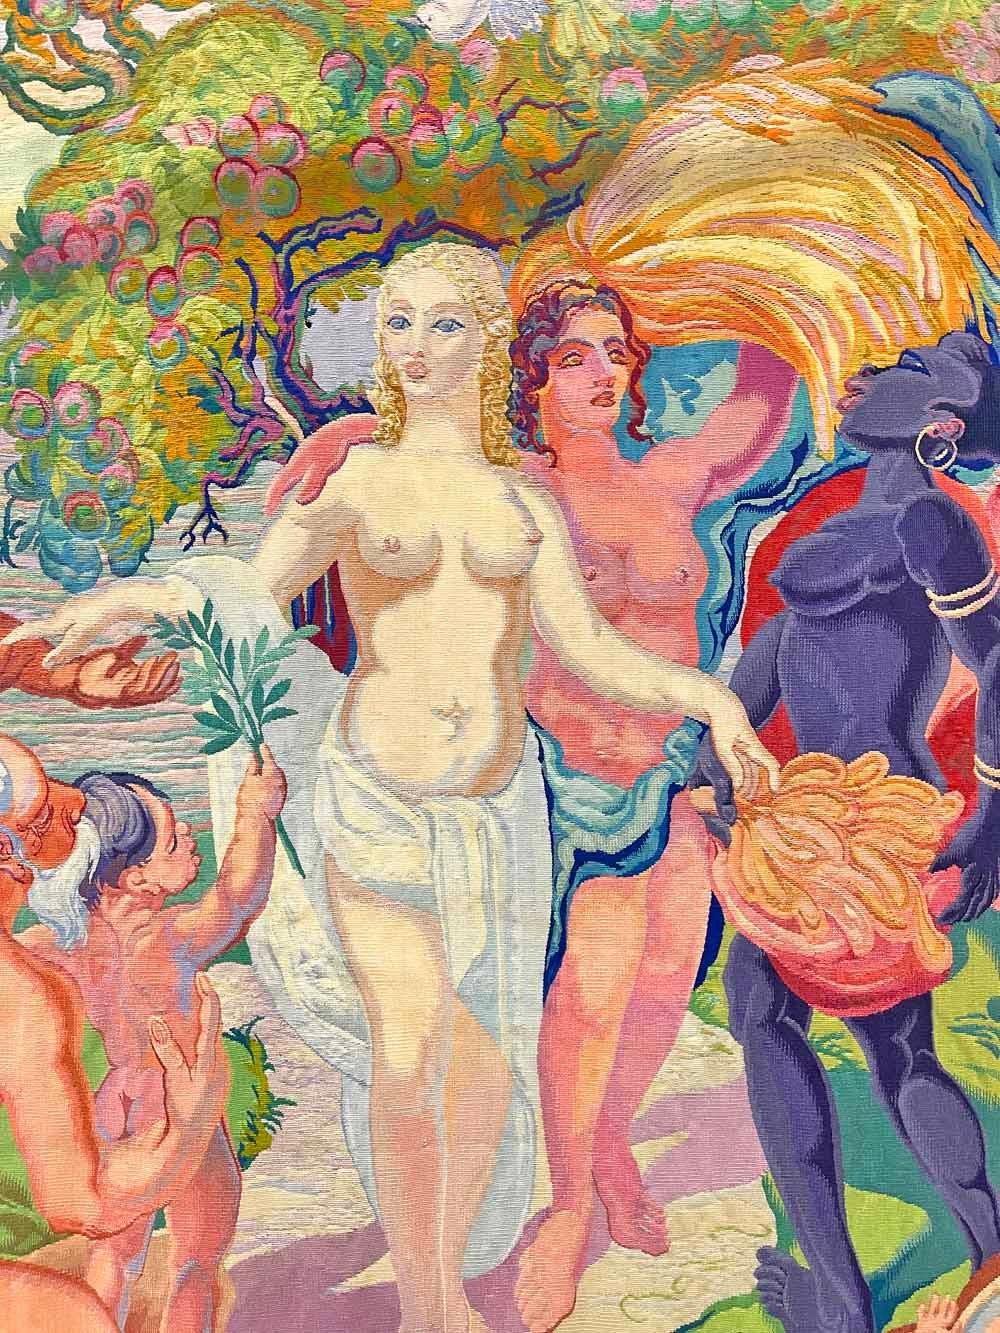 A unique and remarkable work of art with great historical importance, this monumental Art Deco tapestry celebrating the end of World War II presents a large scene of nude male and female figures in brilliant colors symbolizing rebirth and abundance.